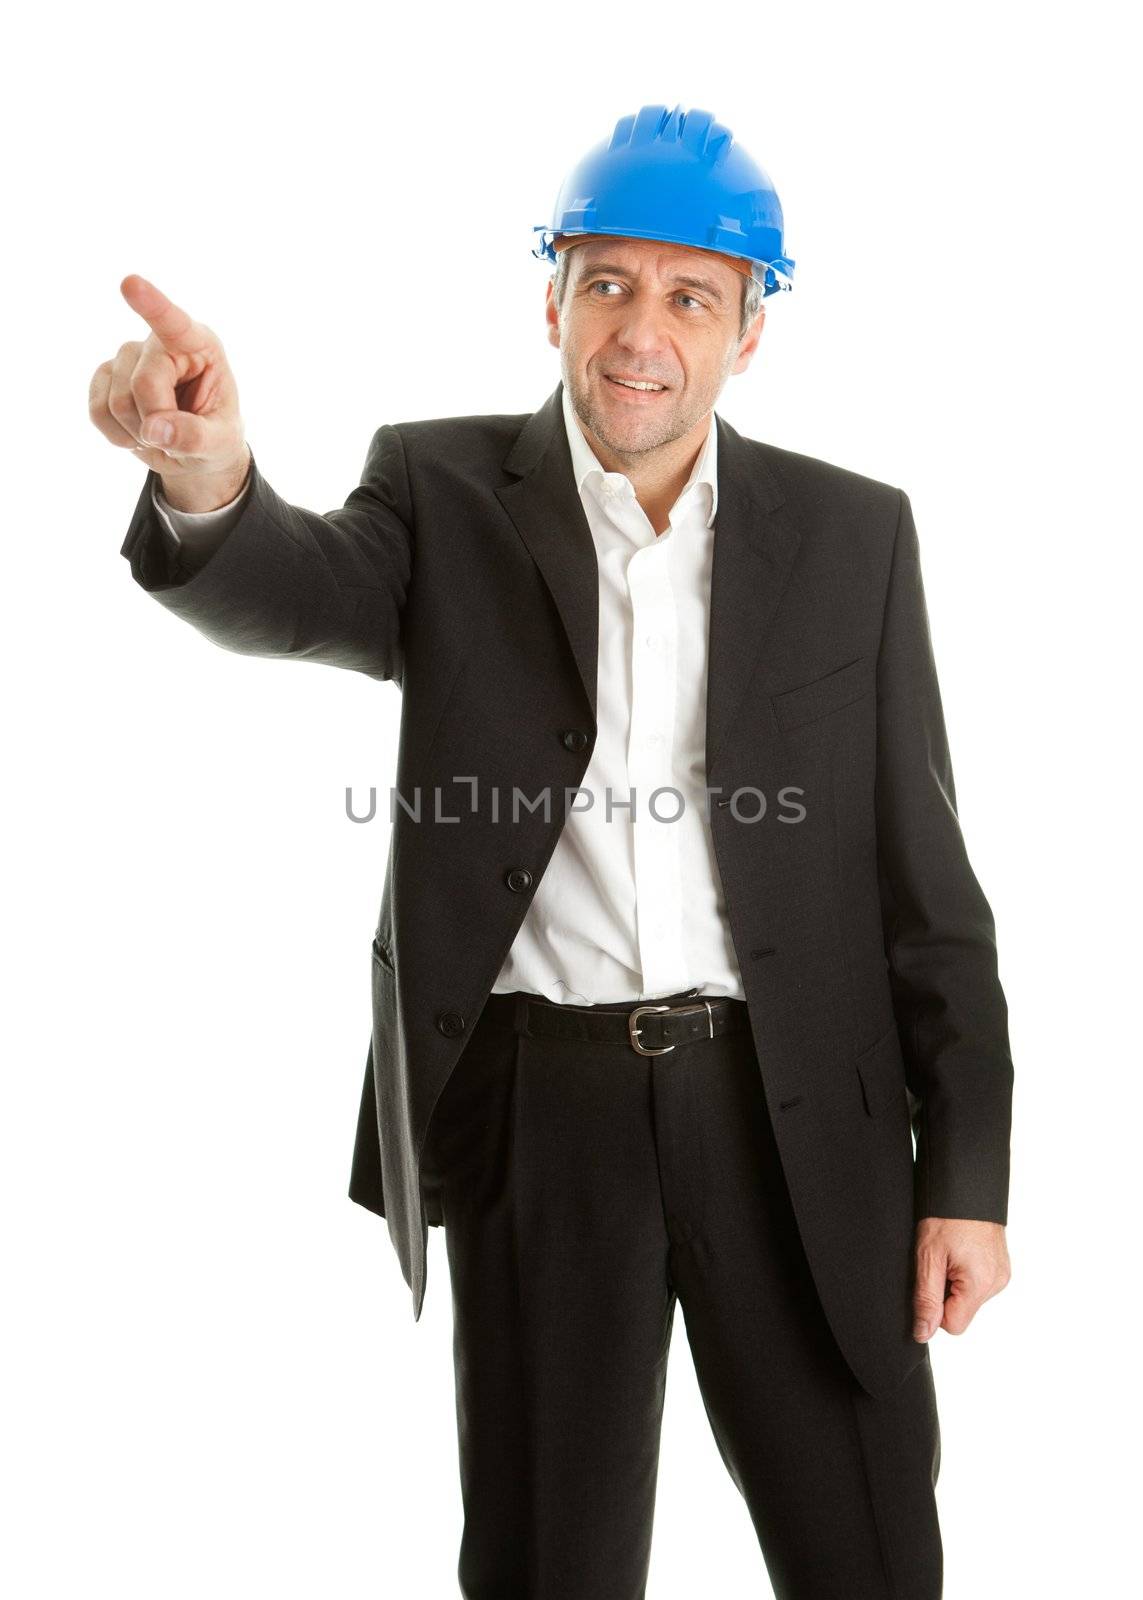 Portrait of successfull architect wearing blue hard hat and pointing. Isolated on white